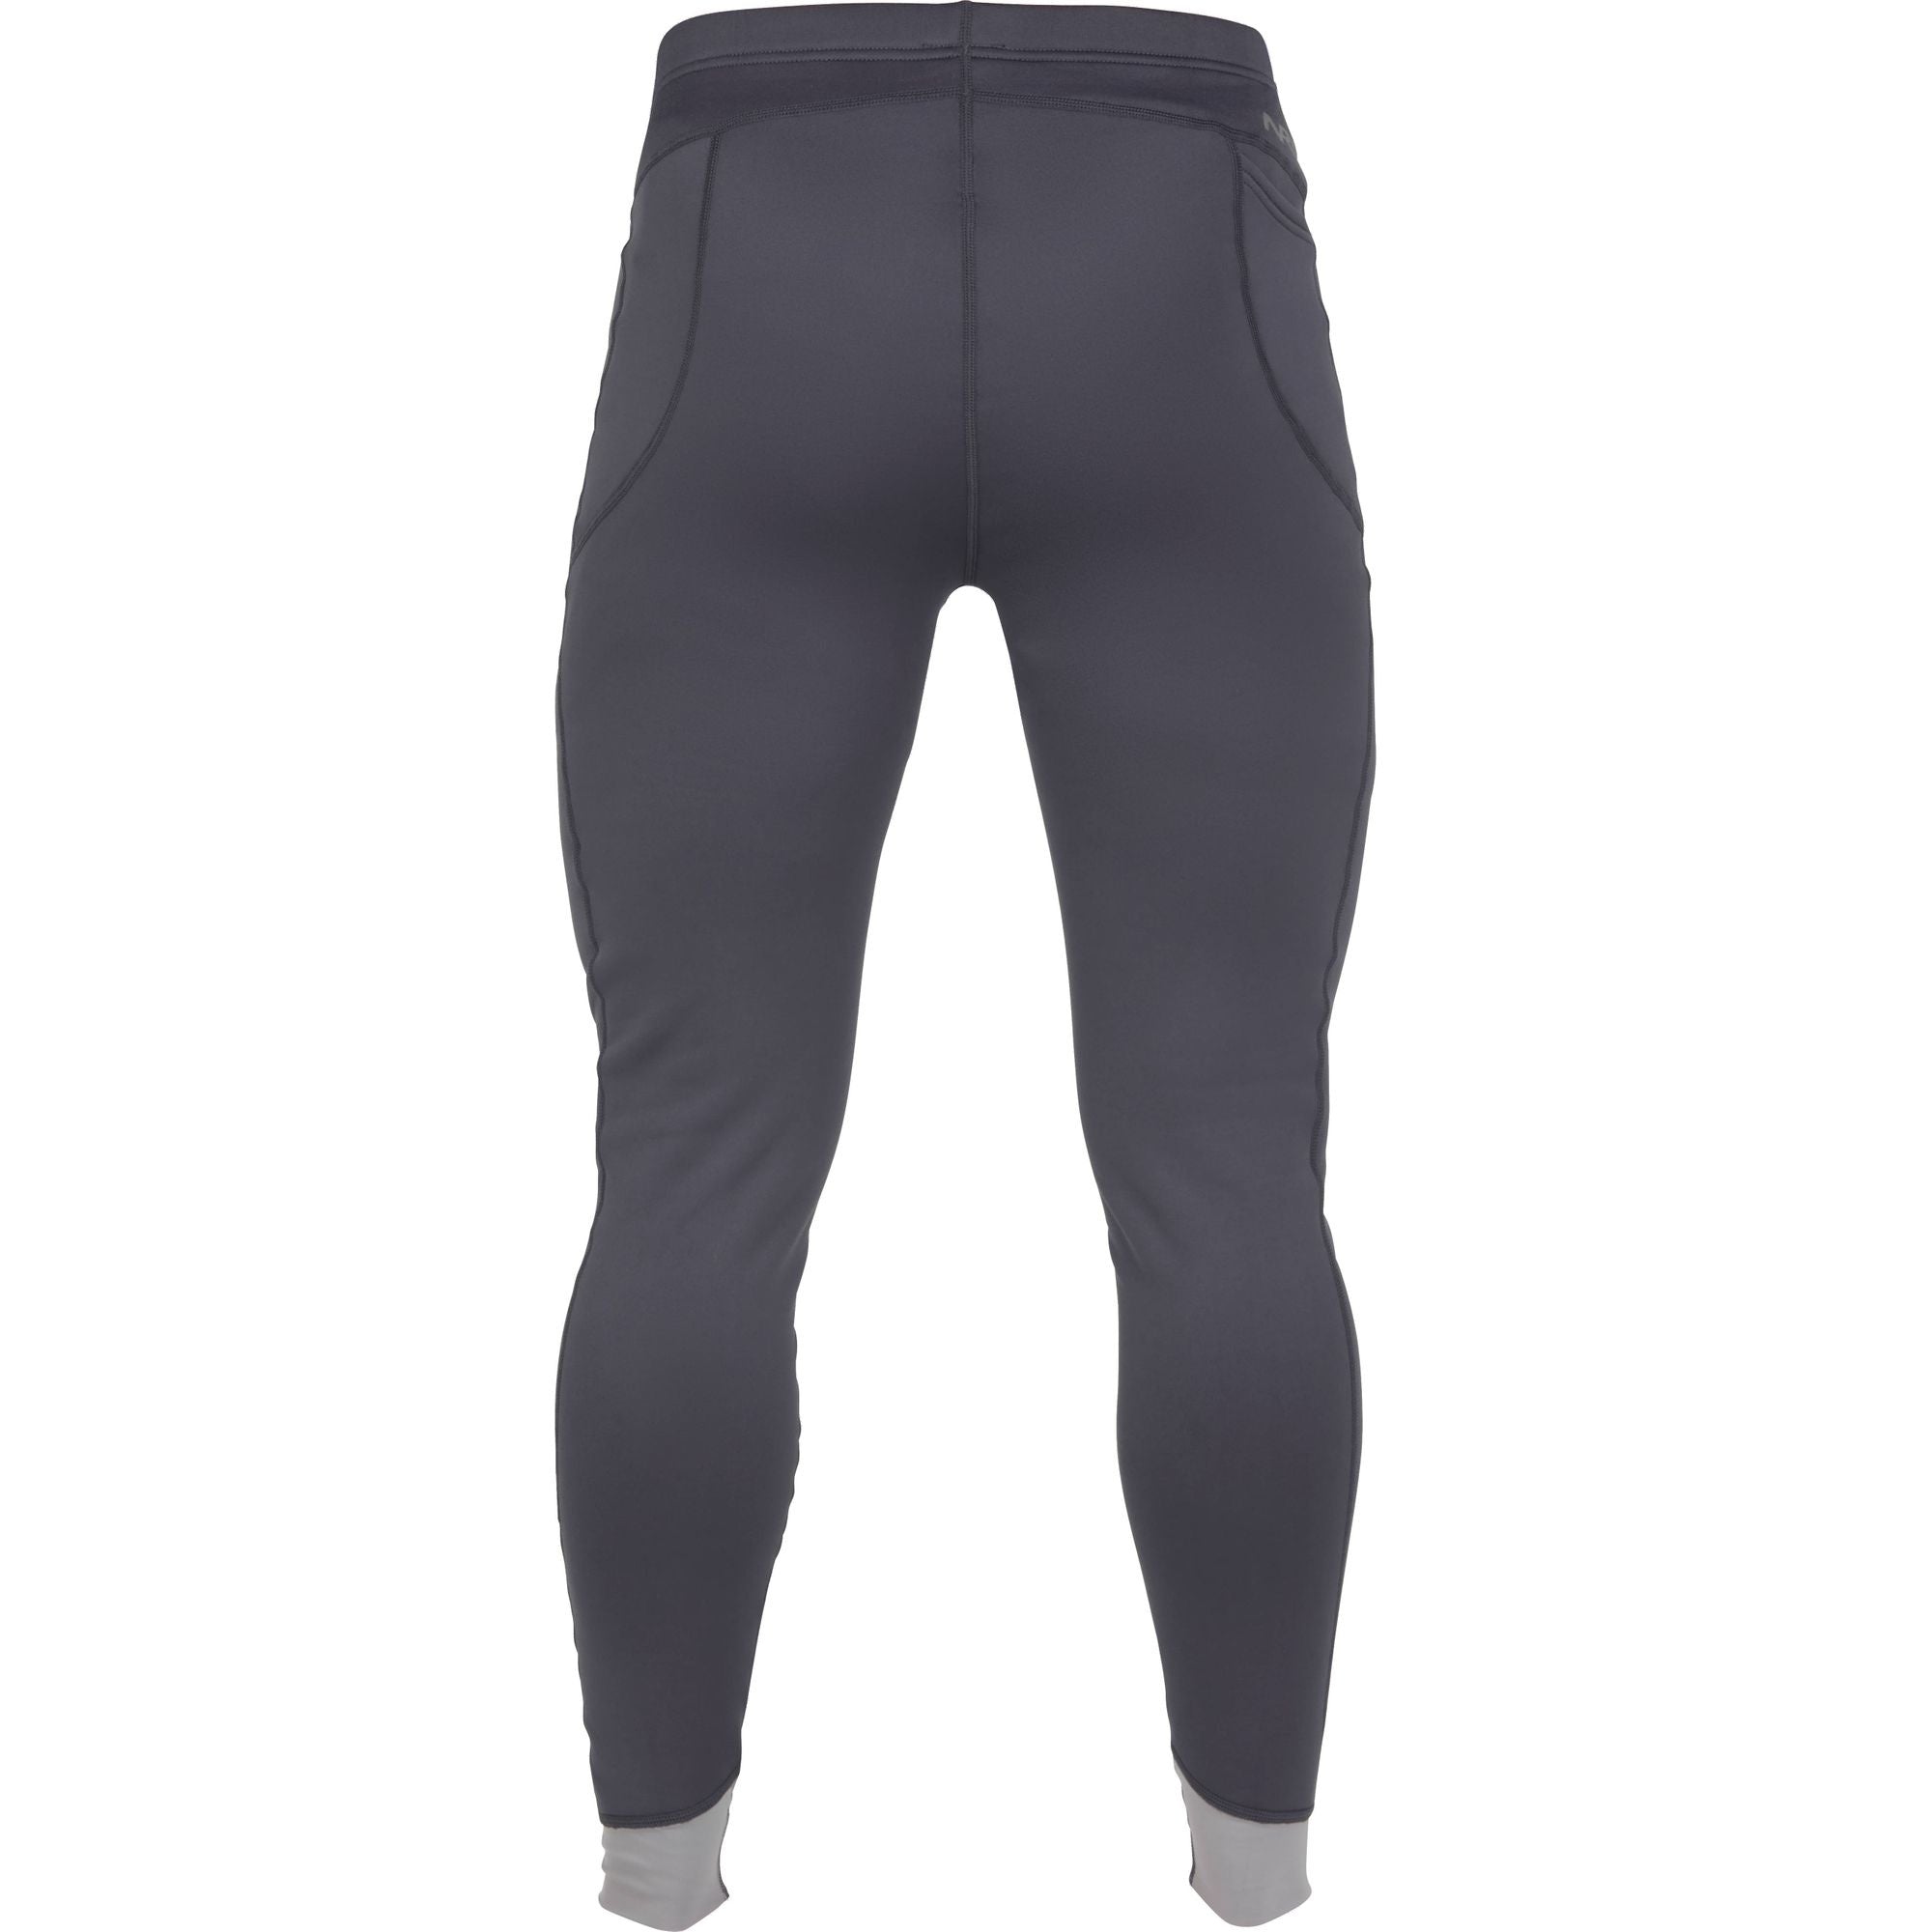 NRS - Mens Expedition Weight Pant